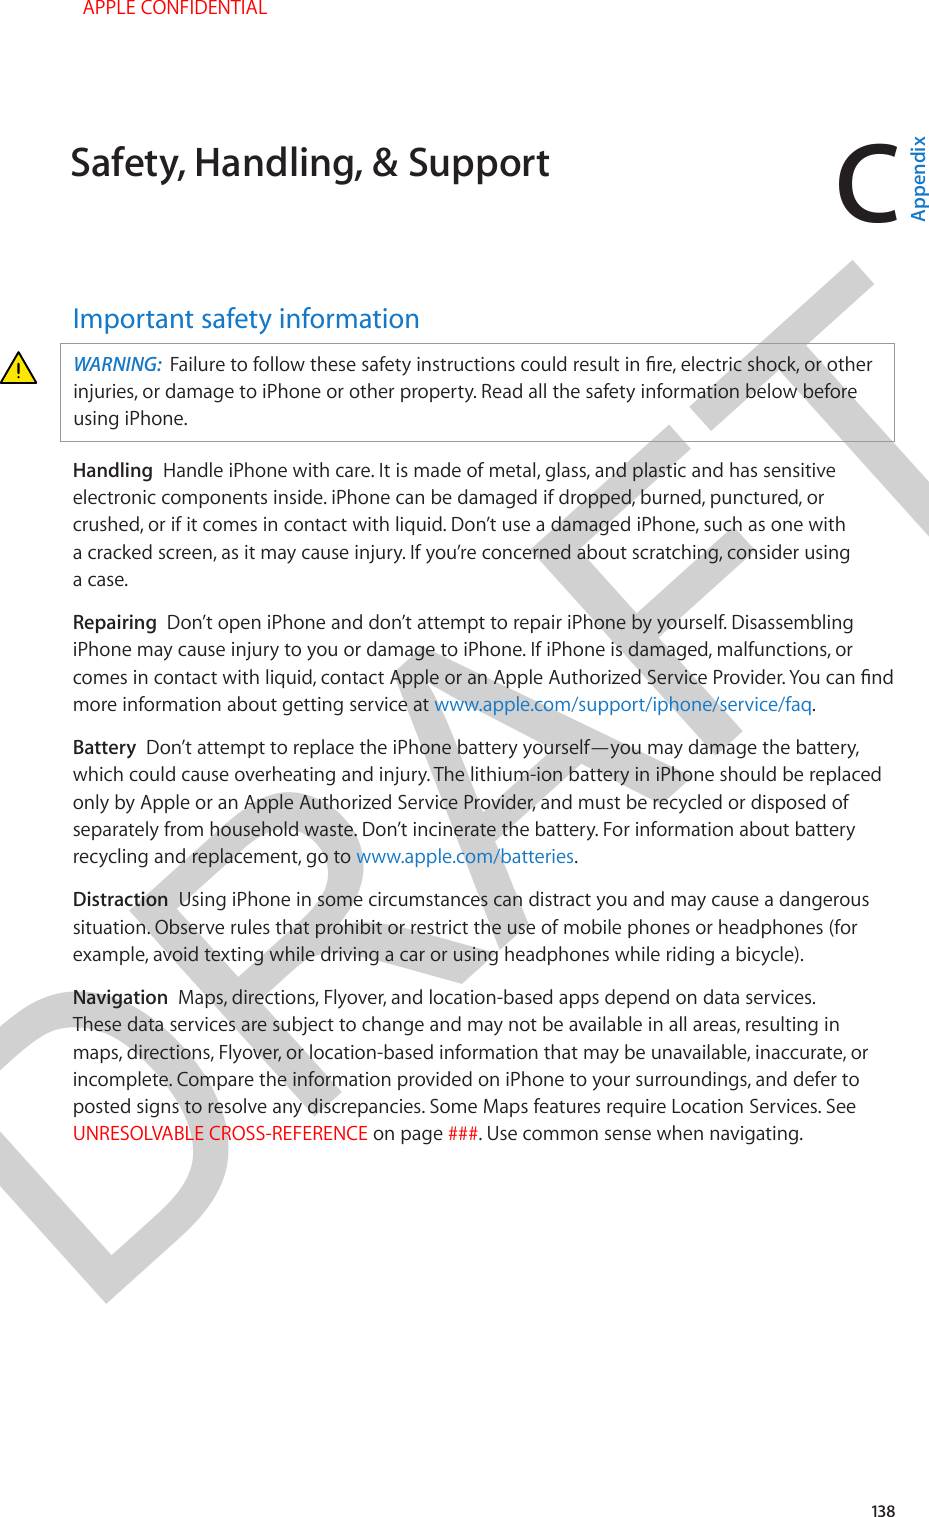 DRAFTC138Important safety informationWARNING:  injuries, or damage to iPhone or other property. Read all the safety information below before using iPhone.Handling  Handle iPhone with care. It is made of metal, glass, and plastic and has sensitive electronic components inside. iPhone can be damaged if dropped, burned, punctured, or crushed, or if it comes in contact with liquid. Don’t use a damaged iPhone, such as one with a cracked screen, as it may cause injury. If you’re concerned about scratching, consider using a case.Repairing  Don’t open iPhone and don’t attempt to repair iPhone by yourself. Disassembling iPhone may cause injury to you or damage to iPhone. If iPhone is damaged, malfunctions, or more information about getting service at www.apple.com/support/iphone/service/faq.Battery  Don’t attempt to replace the iPhone battery yourself—you may damage the battery, which could cause overheating and injury. The lithium-ion battery in iPhone should be replaced only by Apple or an Apple Authorized Service Provider, and must be recycled or disposed of separately from household waste. Don’t incinerate the battery. For information about battery recycling and replacement, go to www.apple.com/batteries.Distraction  Using iPhone in some circumstances can distract you and may cause a dangerous situation. Observe rules that prohibit or restrict the use of mobile phones or headphones (for example, avoid texting while driving a car or using headphones while riding a bicycle).Navigation  Maps, directions, Flyover, and location-based apps depend on data services. These data services are subject to change and may not be available in all areas, resulting in maps, directions, Flyover, or location-based information that may be unavailable, inaccurate, or incomplete. Compare the information provided on iPhone to your surroundings, and defer to posted signs to resolve any discrepancies. Some Maps features require Location Services. See UNRESOLVABLE CROSS-REFERENCE on page ###. Use common sense when navigating.Safety, Handling, &amp; Support  APPLE CONFIDENTIALAppendix